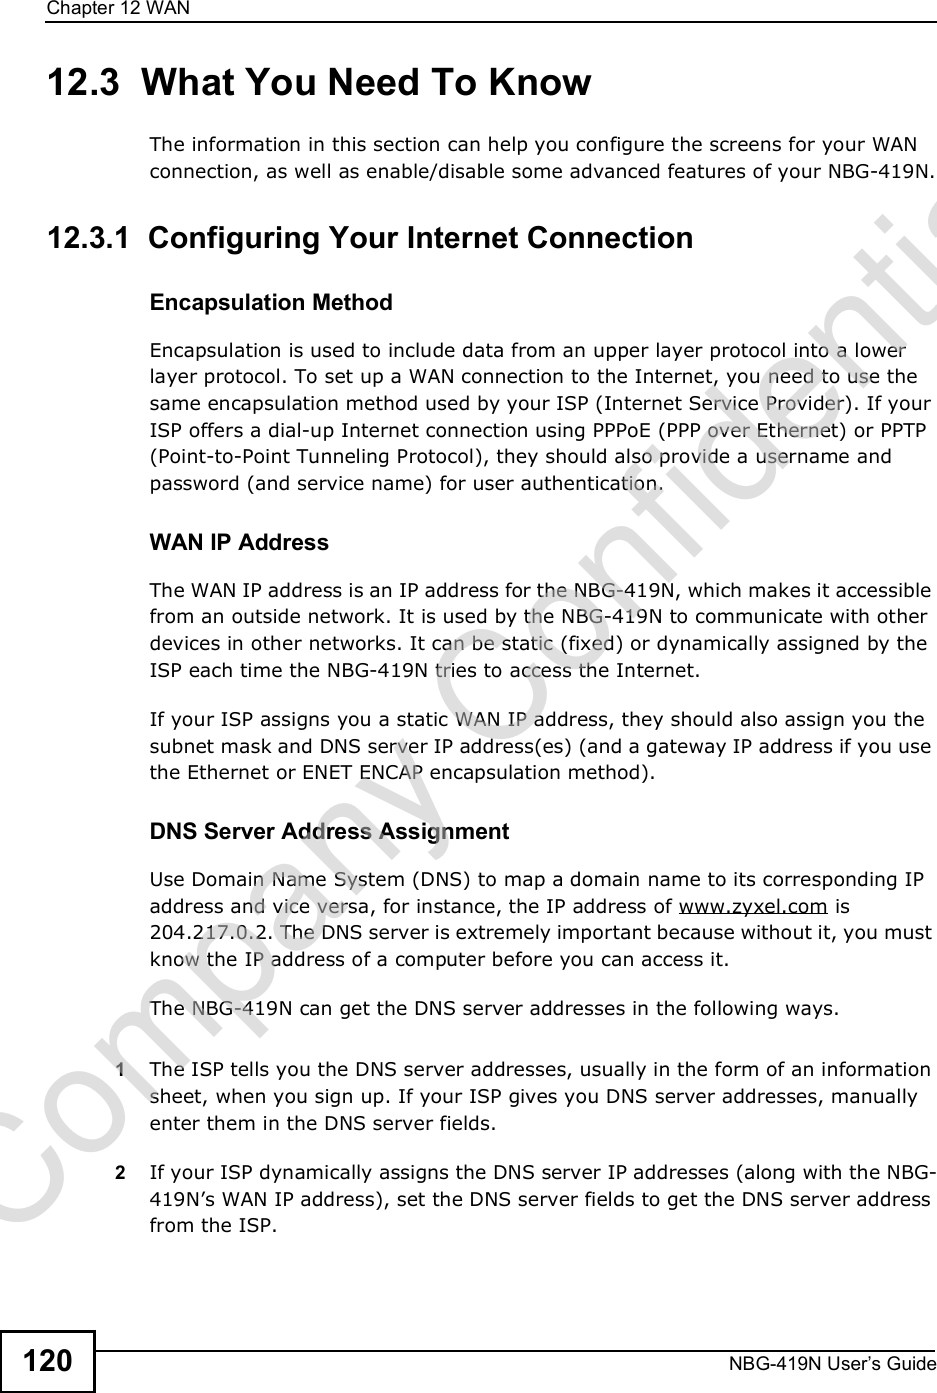 Chapter 12WANNBG-419N User s Guide12012.3  What You Need To KnowThe information in this section can help you configure the screens for your WAN connection, as well as enable/disable some advanced features of your NBG-419N.12.3.1  Configuring Your Internet ConnectionEncapsulation MethodEncapsulation is used to include data from an upper layer protocol into a lower layer protocol. To set up a WAN connection to the Internet, you need to use the same encapsulation method used by your ISP (Internet Service Provider). If your ISP offers a dial-up Internet connection using PPPoE (PPP over Ethernet) or PPTP (Point-to-Point Tunneling Protocol), they should also provide a username and password (and service name) for user authentication.WAN IP AddressThe WAN IP address is an IP address for the NBG-419N, which makes it accessible from an outside network. It is used by the NBG-419N to communicate with other devices in other networks. It can be static (fixed) or dynamically assigned by the ISP each time the NBG-419N tries to access the Internet.If your ISP assigns you a static WAN IP address, they should also assign you the subnet mask and DNS server IP address(es) (and a gateway IP address if you use the Ethernet or ENET ENCAP encapsulation method).DNS Server Address AssignmentUse Domain Name System (DNS) to map a domain name to its corresponding IP address and vice versa, for instance, the IP address of www.zyxel.com is 204.217.0.2. The DNS server is extremely important because without it, you must know the IP address of a computer before you can access it. The NBG-419N can get the DNS server addresses in the following ways.1The ISP tells you the DNS server addresses, usually in the form of an information sheet, when you sign up. If your ISP gives you DNS server addresses, manually enter them in the DNS server fields.2If your ISP dynamically assigns the DNS server IP addresses (along with the NBG-419N!s WAN IP address), set the DNS server fields to get the DNS server address from the ISP. Company Confidential